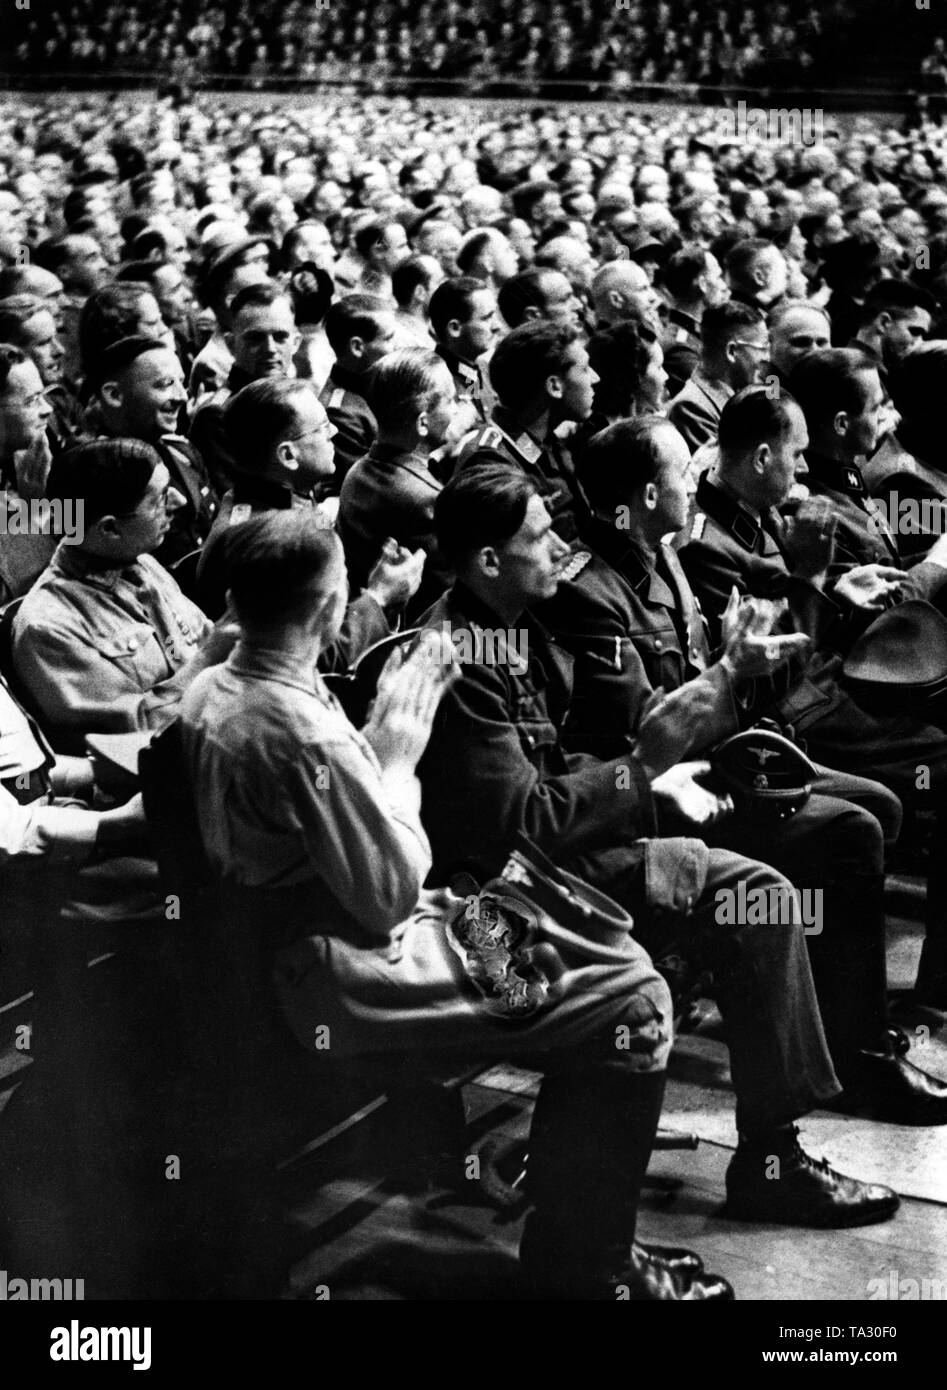 Members of the Wehrmacht and party members applaud after the ministers' speech. Stock Photo